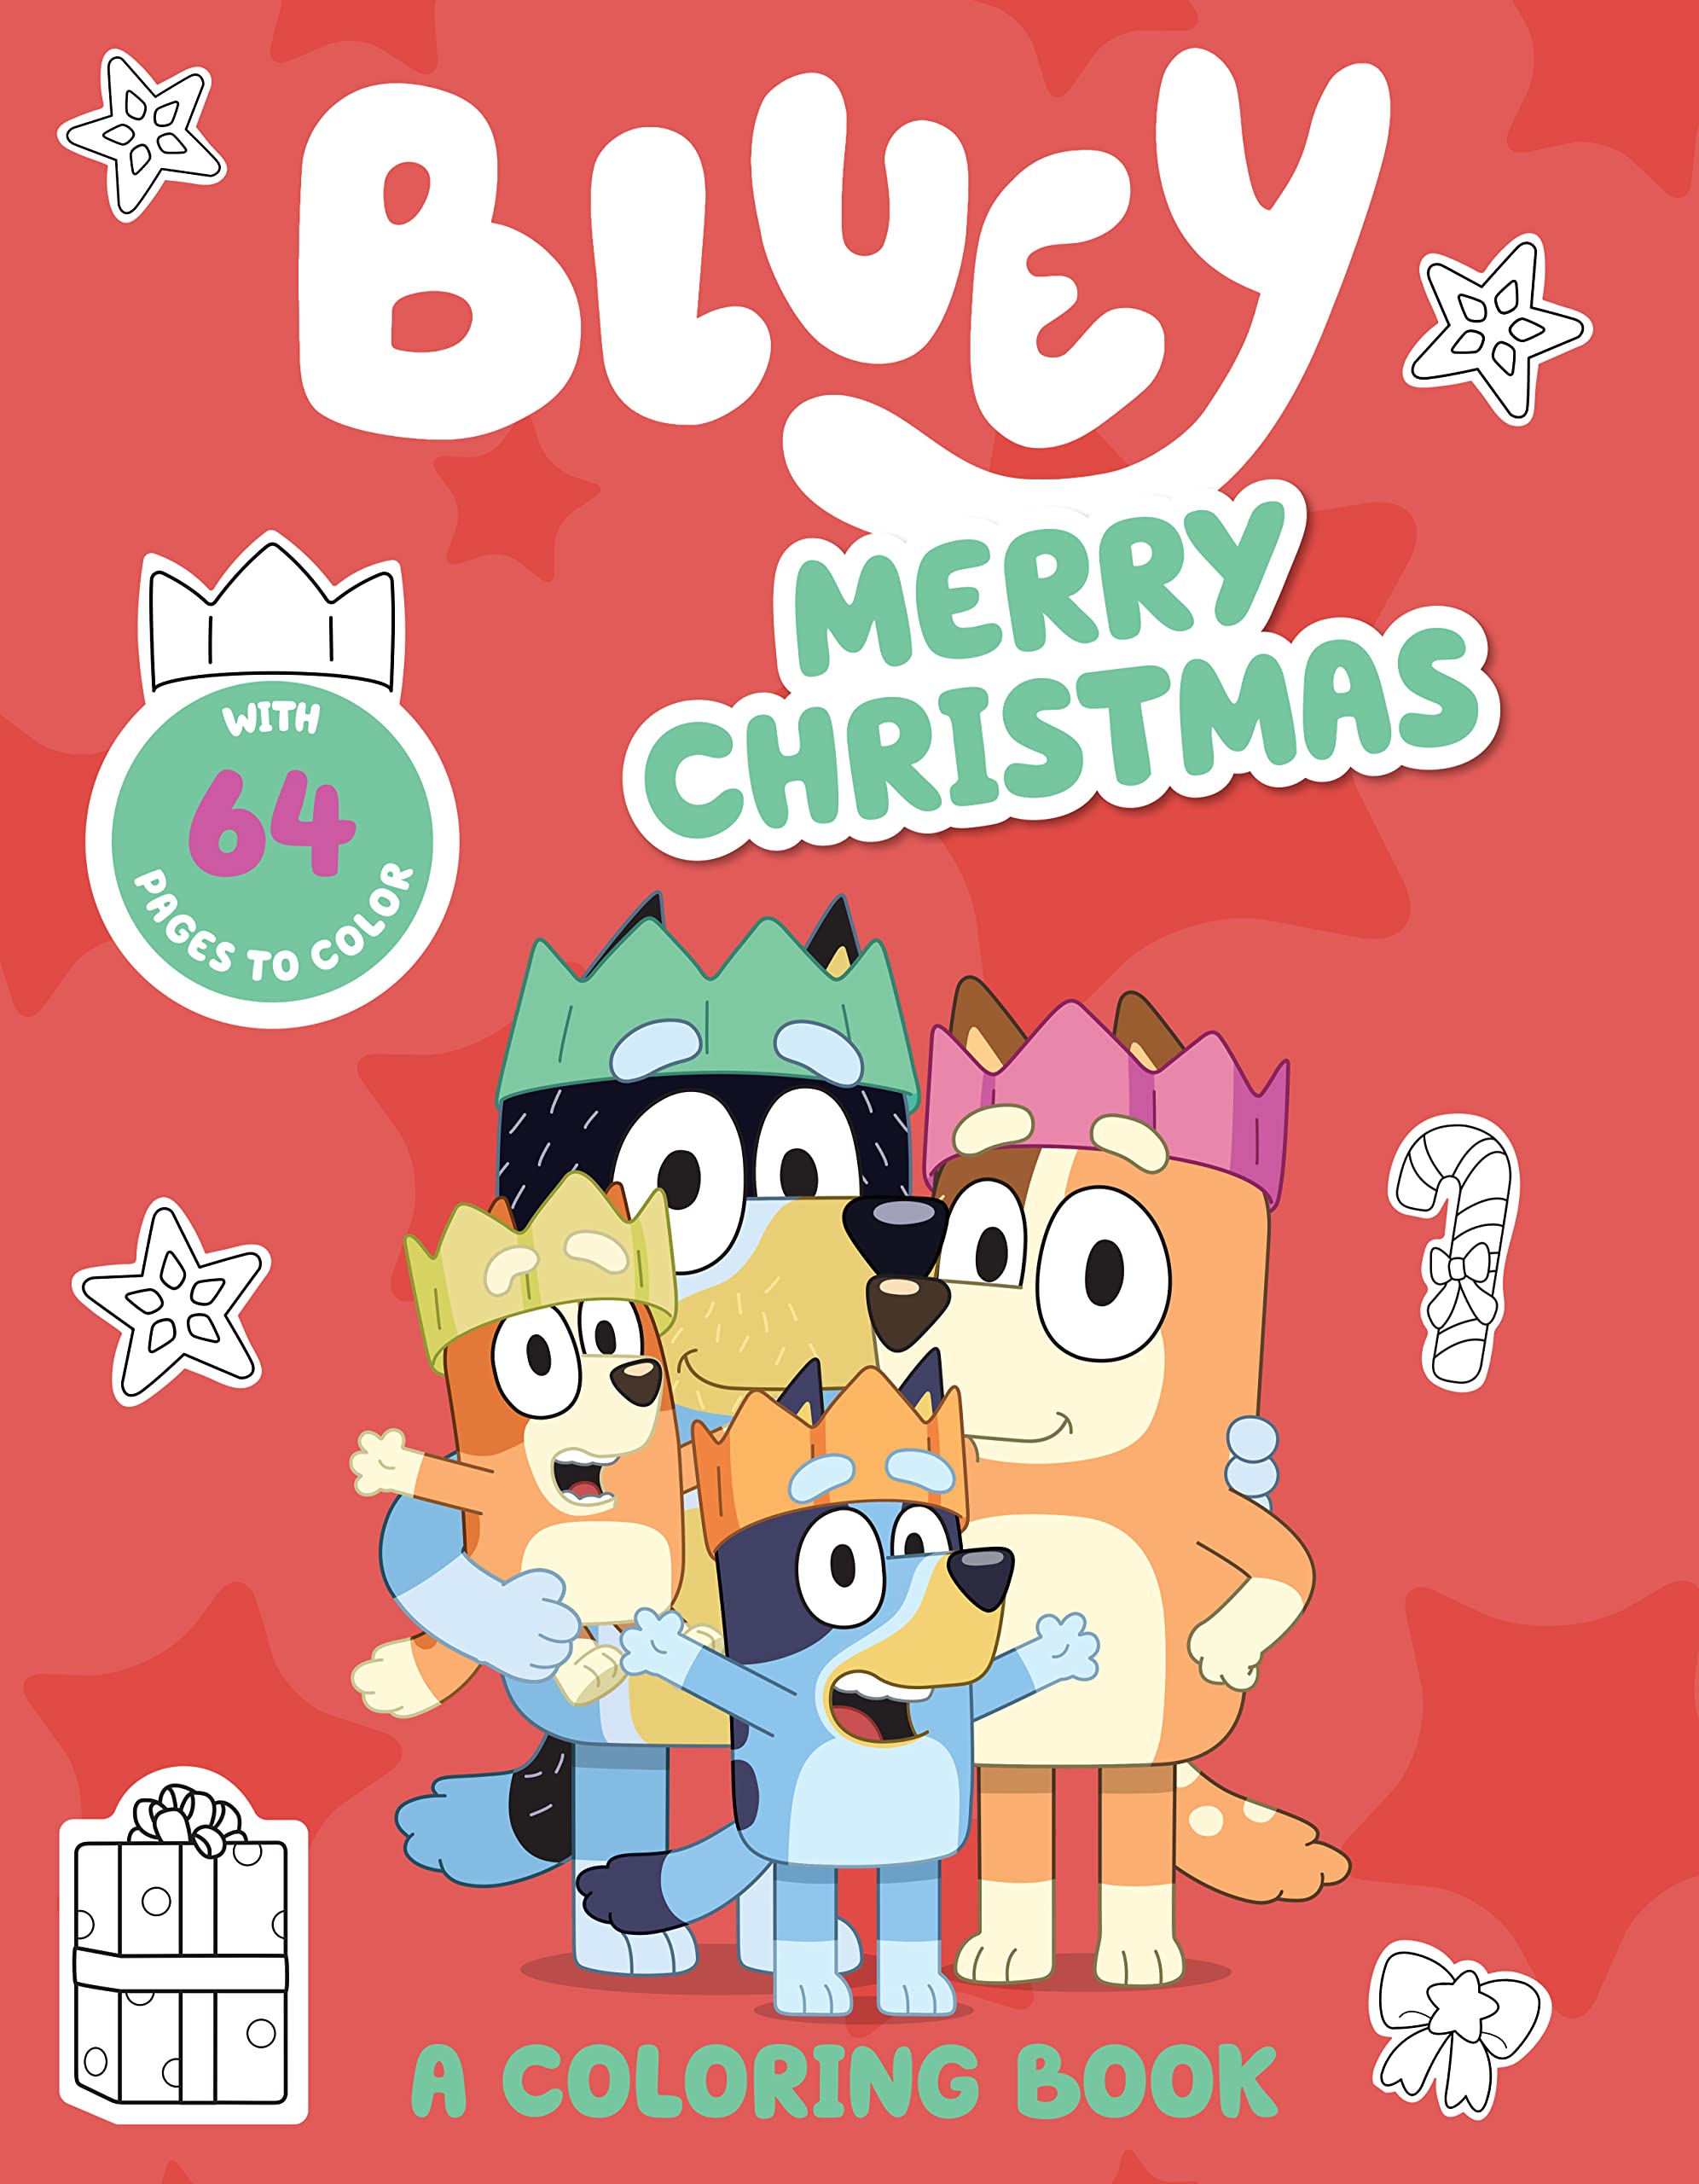 Get 3 for the Price of 2: Bluey Christmas Books: Bluey Merry Christmas Coloring Book $5.58, Christmas Eve with Veranda Santa $8.98 & More + Free Shipping w/ Prime or $35+ orders